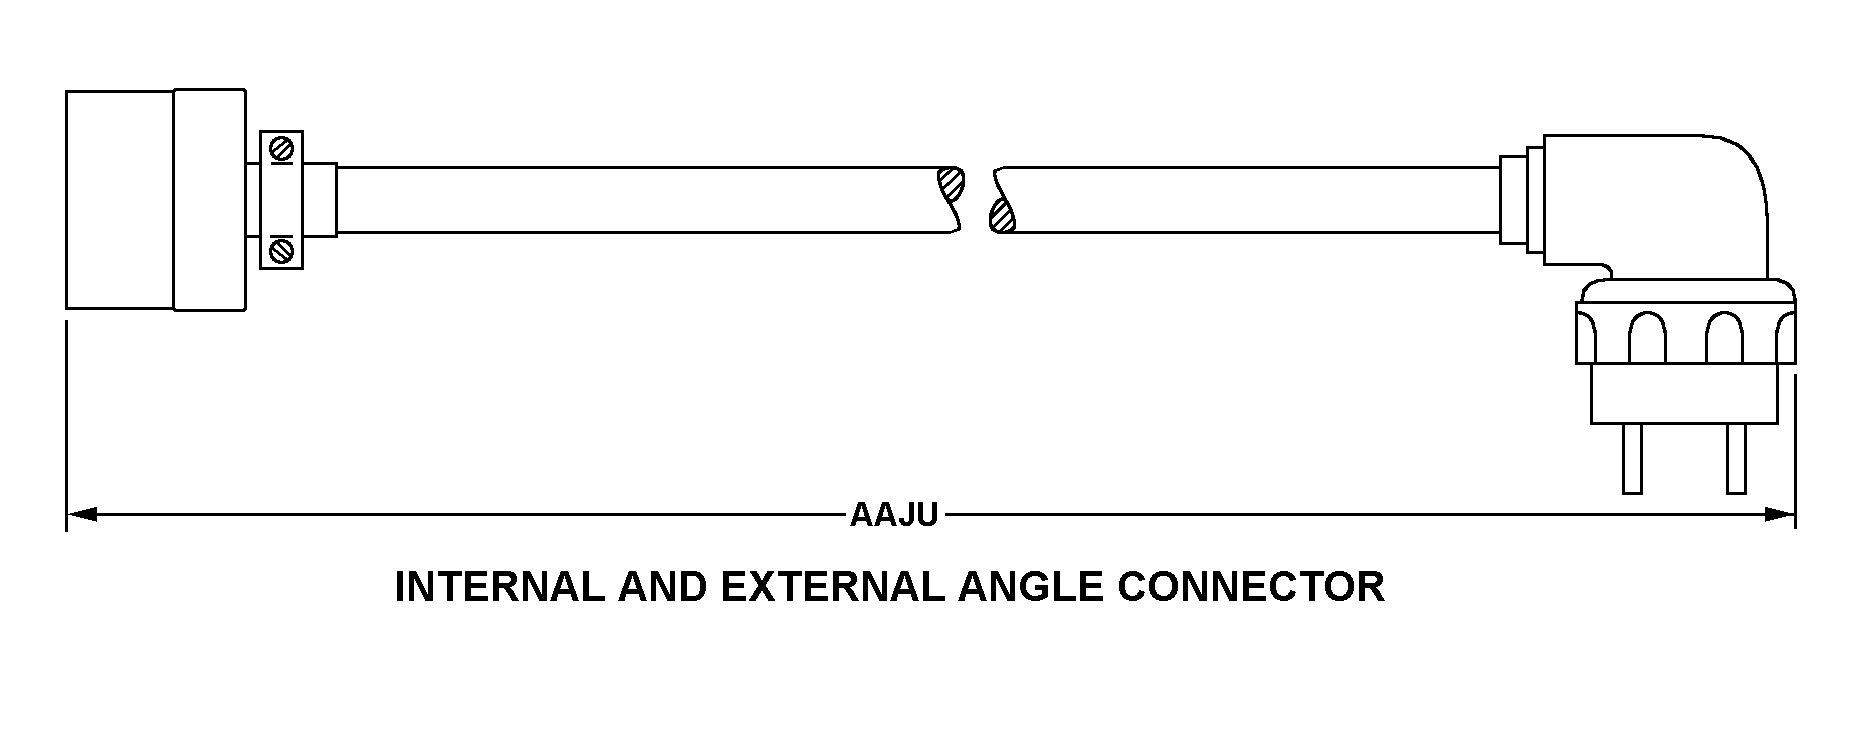 INTERNAL AND EXTERNAL ANGLE CONNECTOR style nsn 5995-01-244-1815